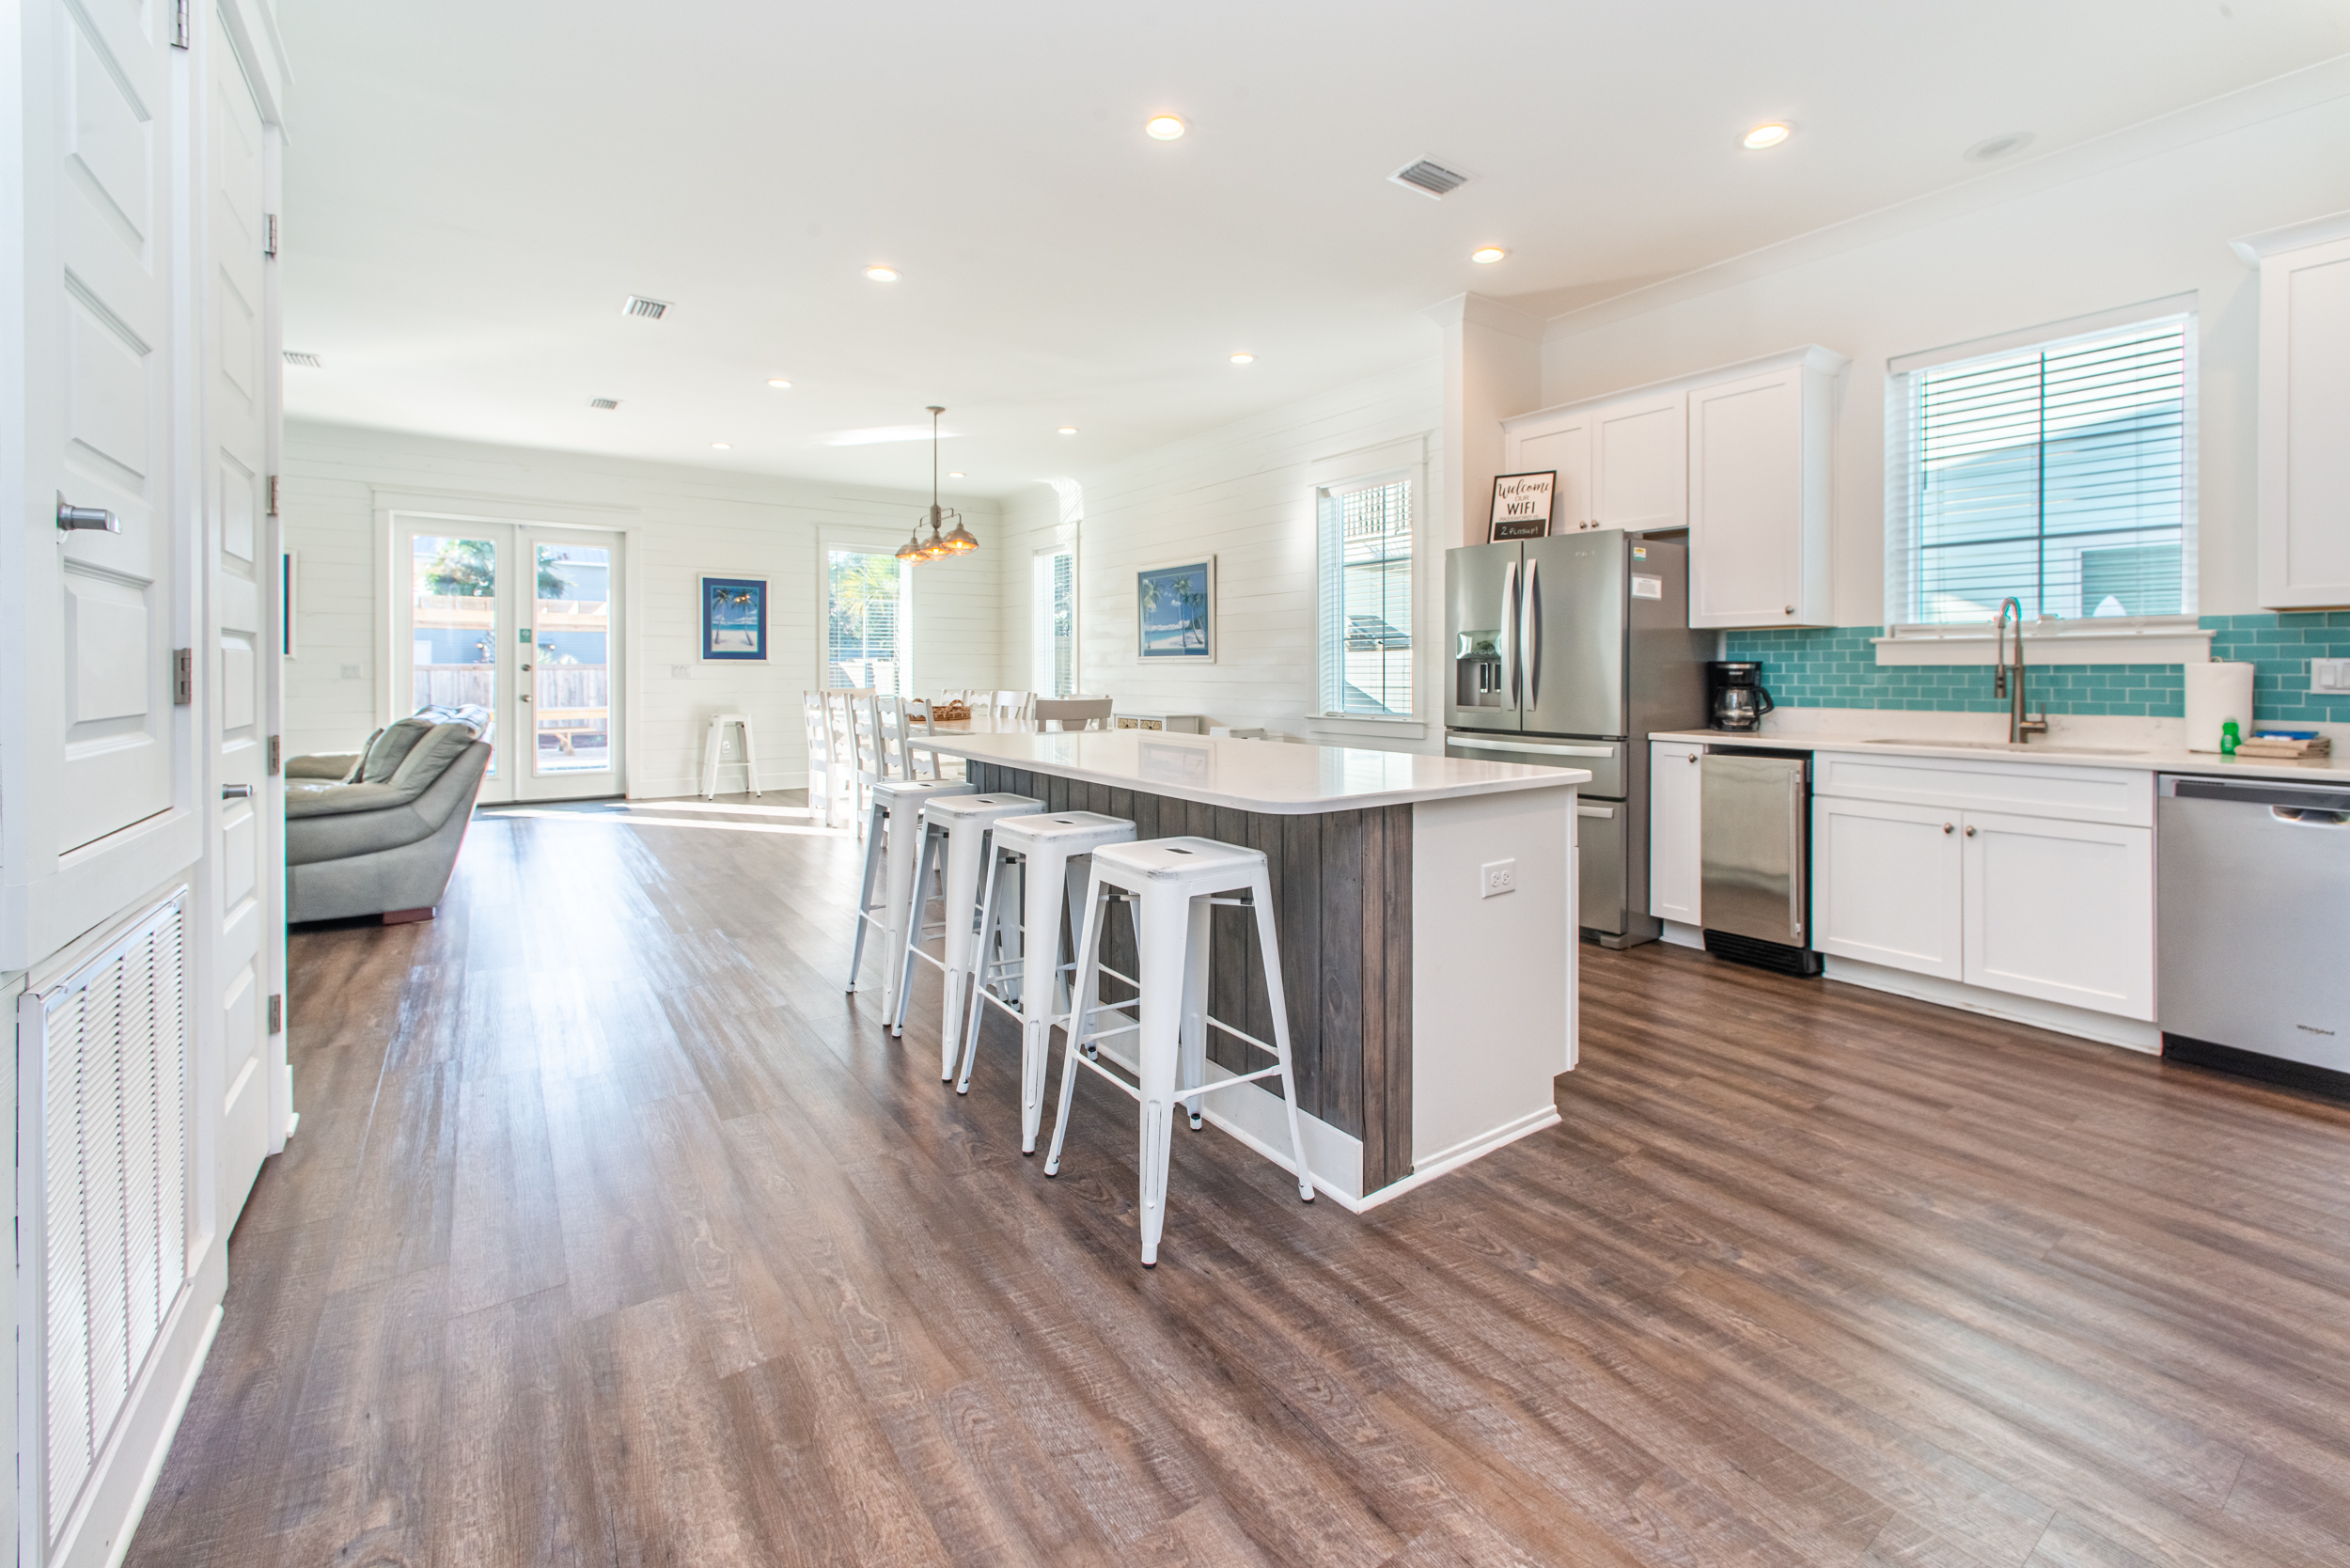 Your Chef will love all of this Space!